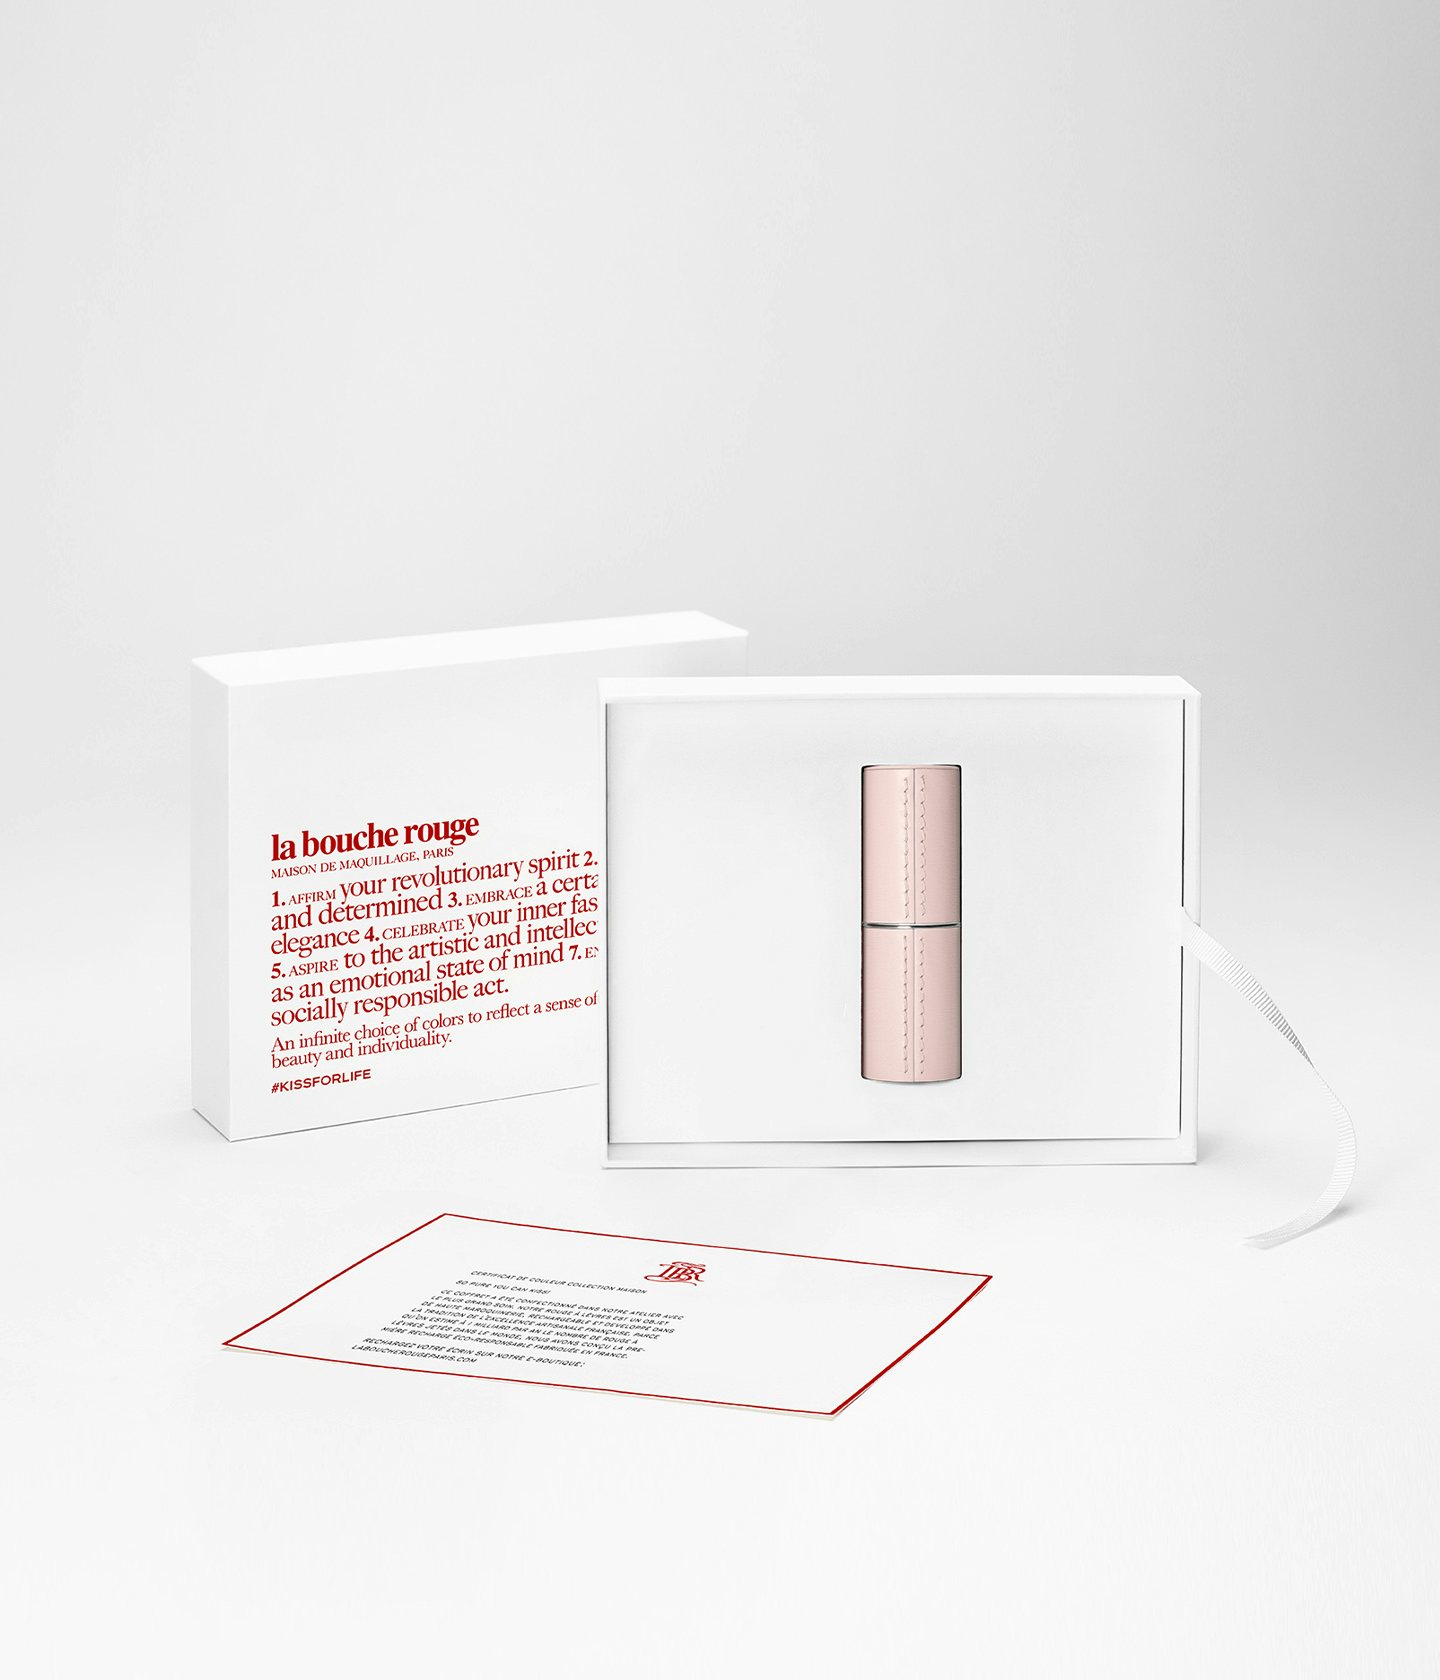 La bouche rouge Pink fine leather case in the Manifesto packaging